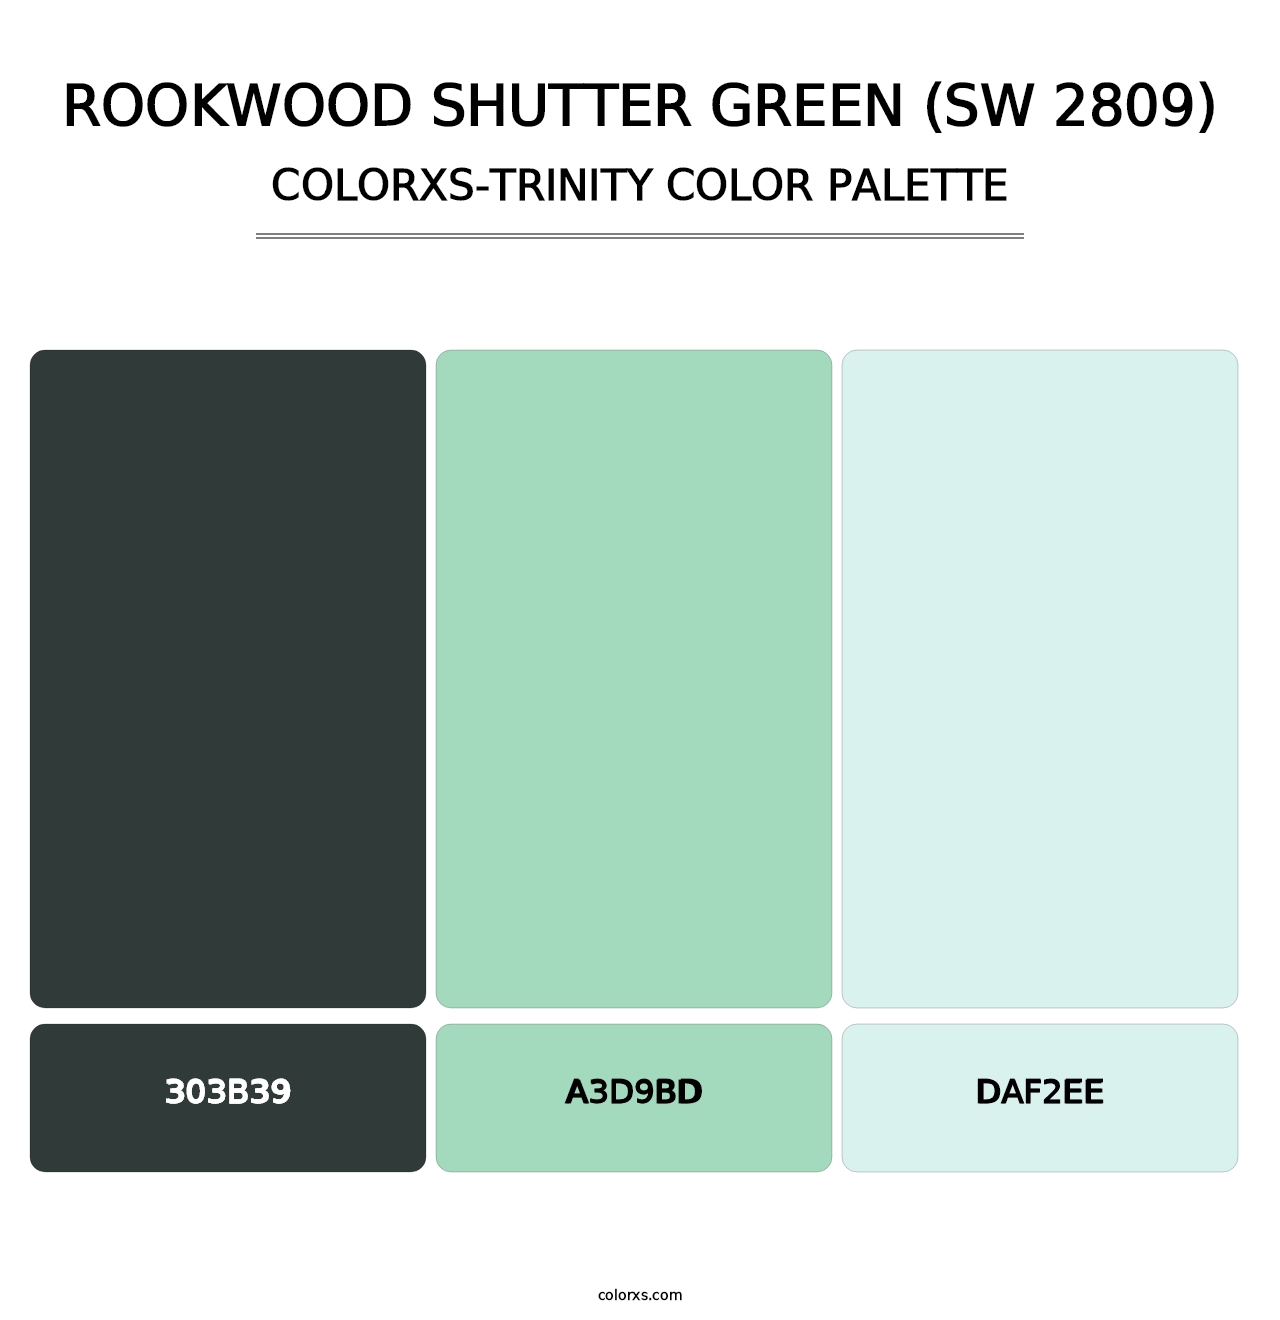 Rookwood Shutter Green (SW 2809) - Colorxs Trinity Palette